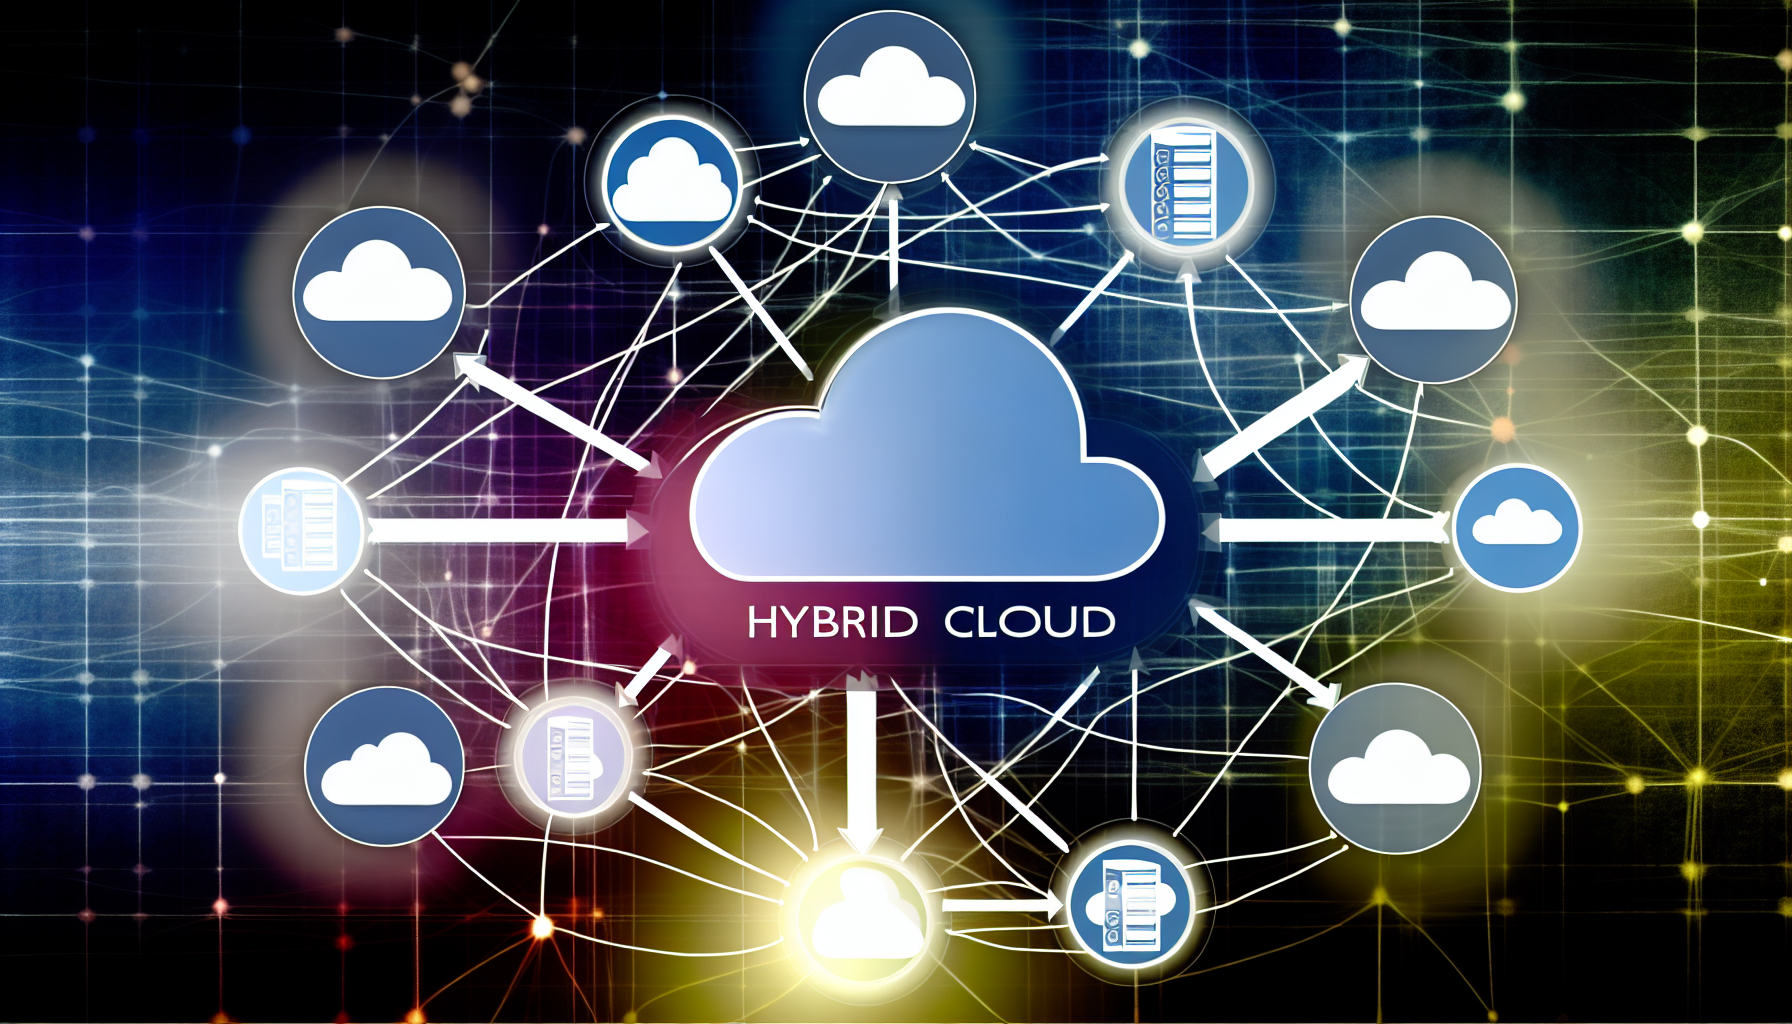 A vibrant graphic illustrating the interconnected nature of hybrid cloud solutions